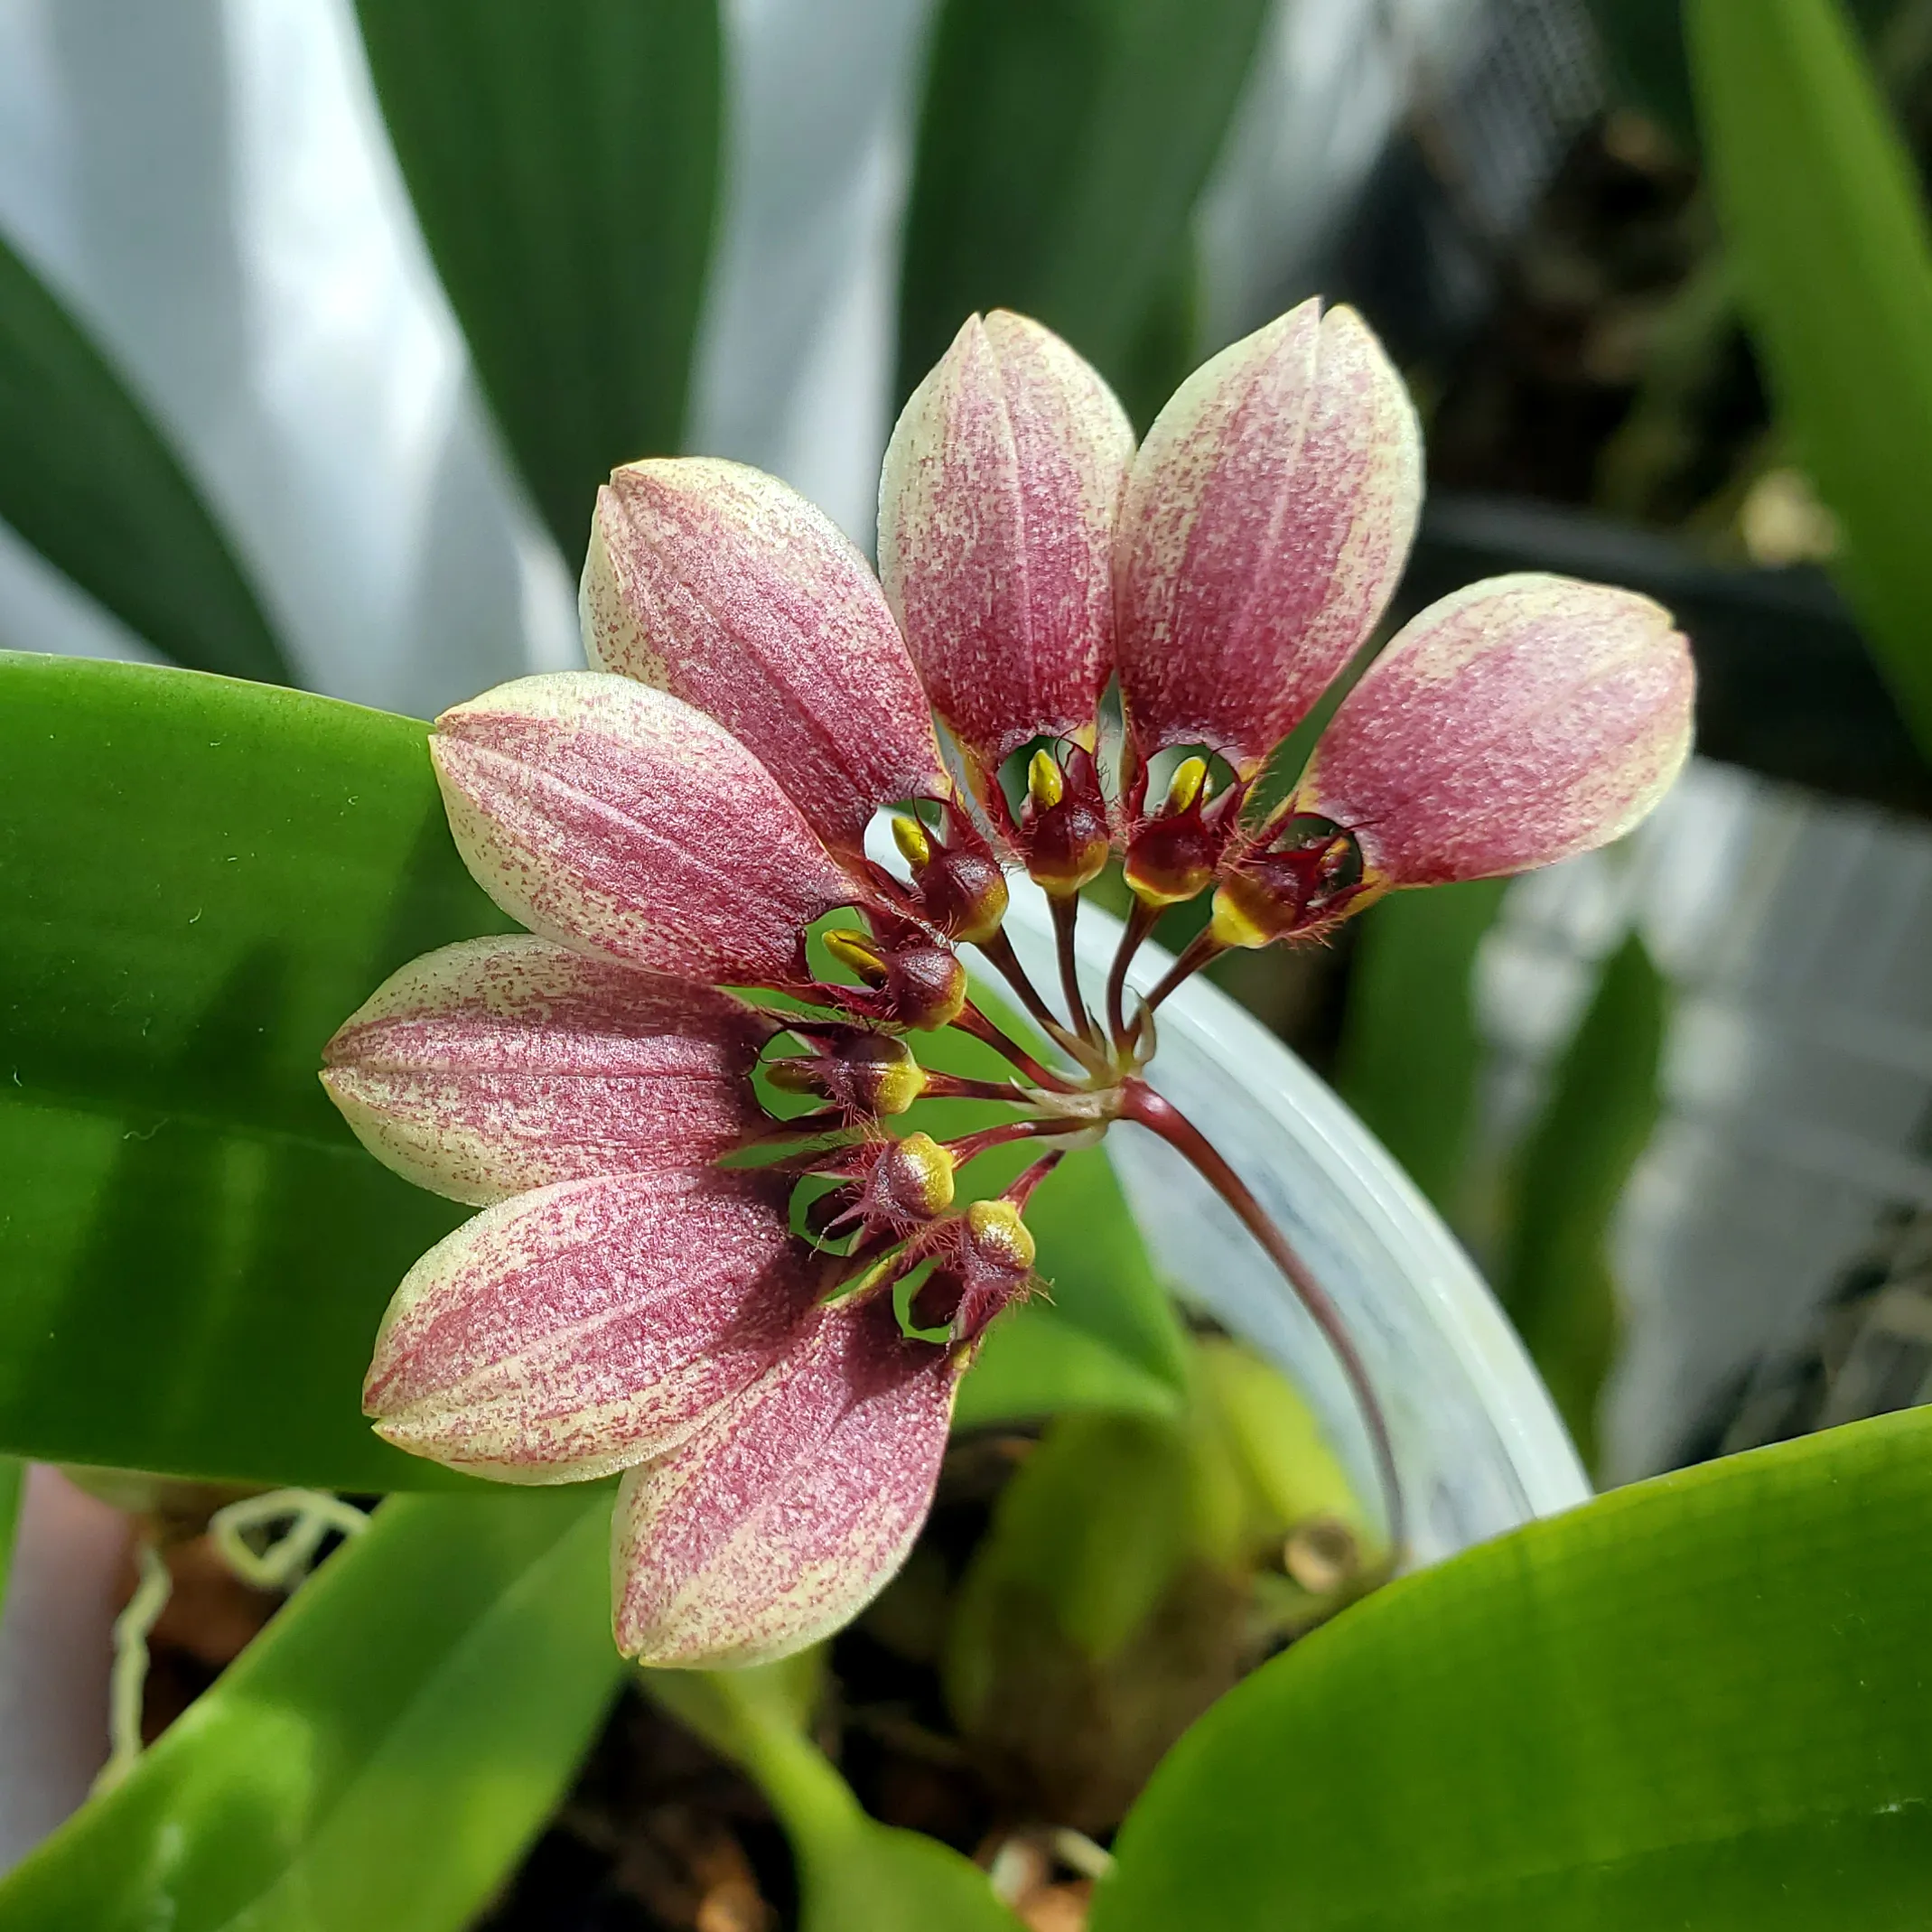 Photo of an orchid flower